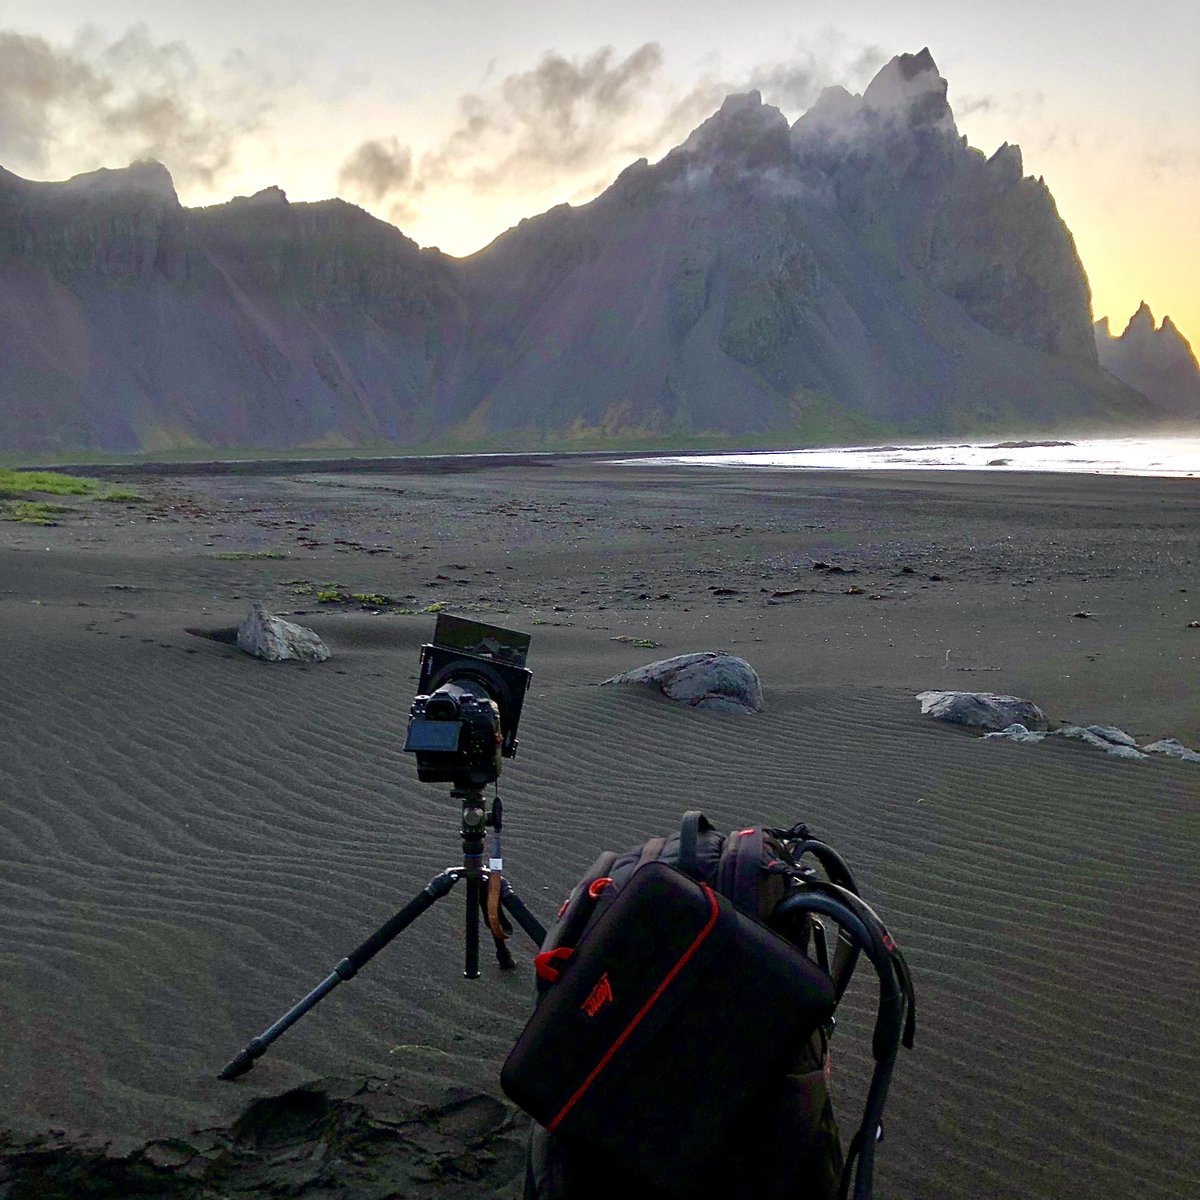 When shooting landscapes, I always use a tripod to keep my camera stable and ensure sharp images. What's your go-to gear for stable shots? #PhotographyTips #GearTalk #LandscapePhotography